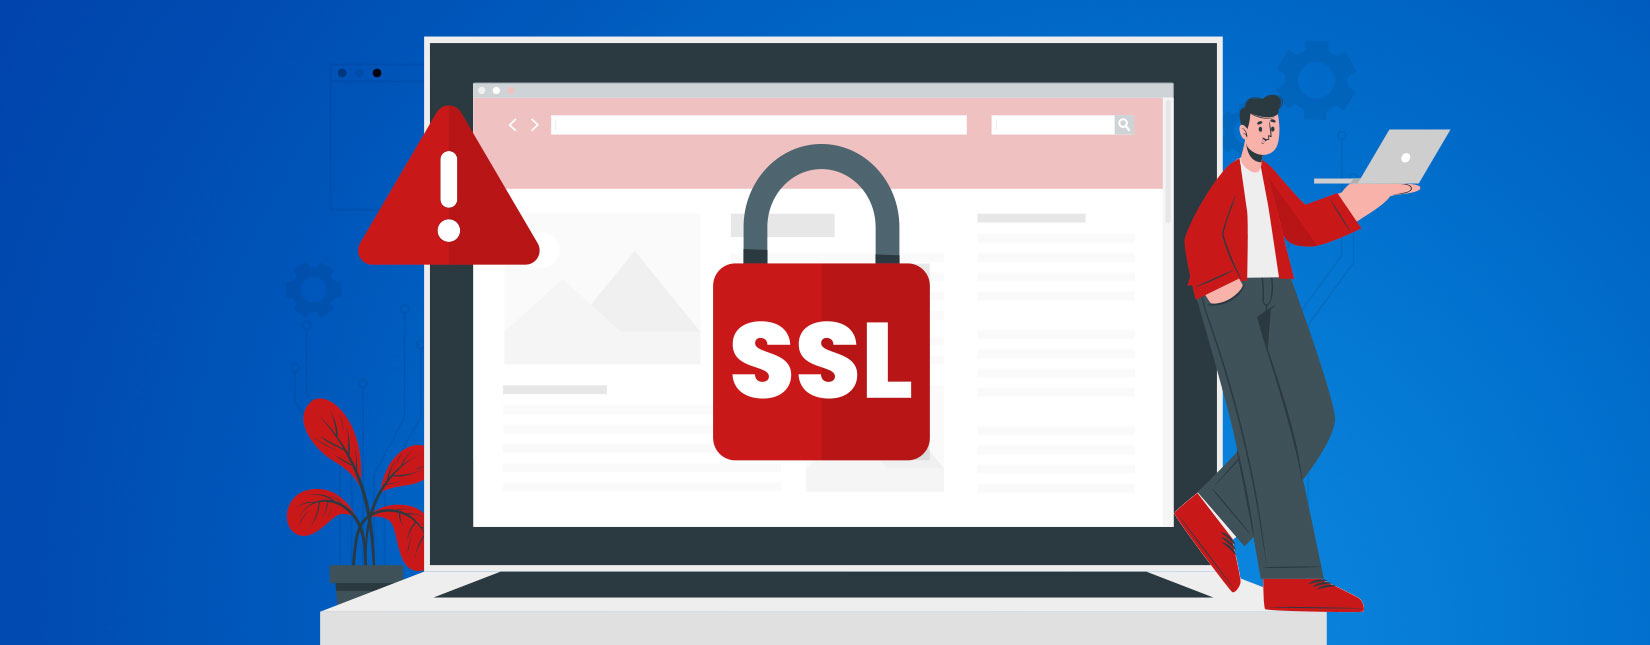 Important SSL Issue Update